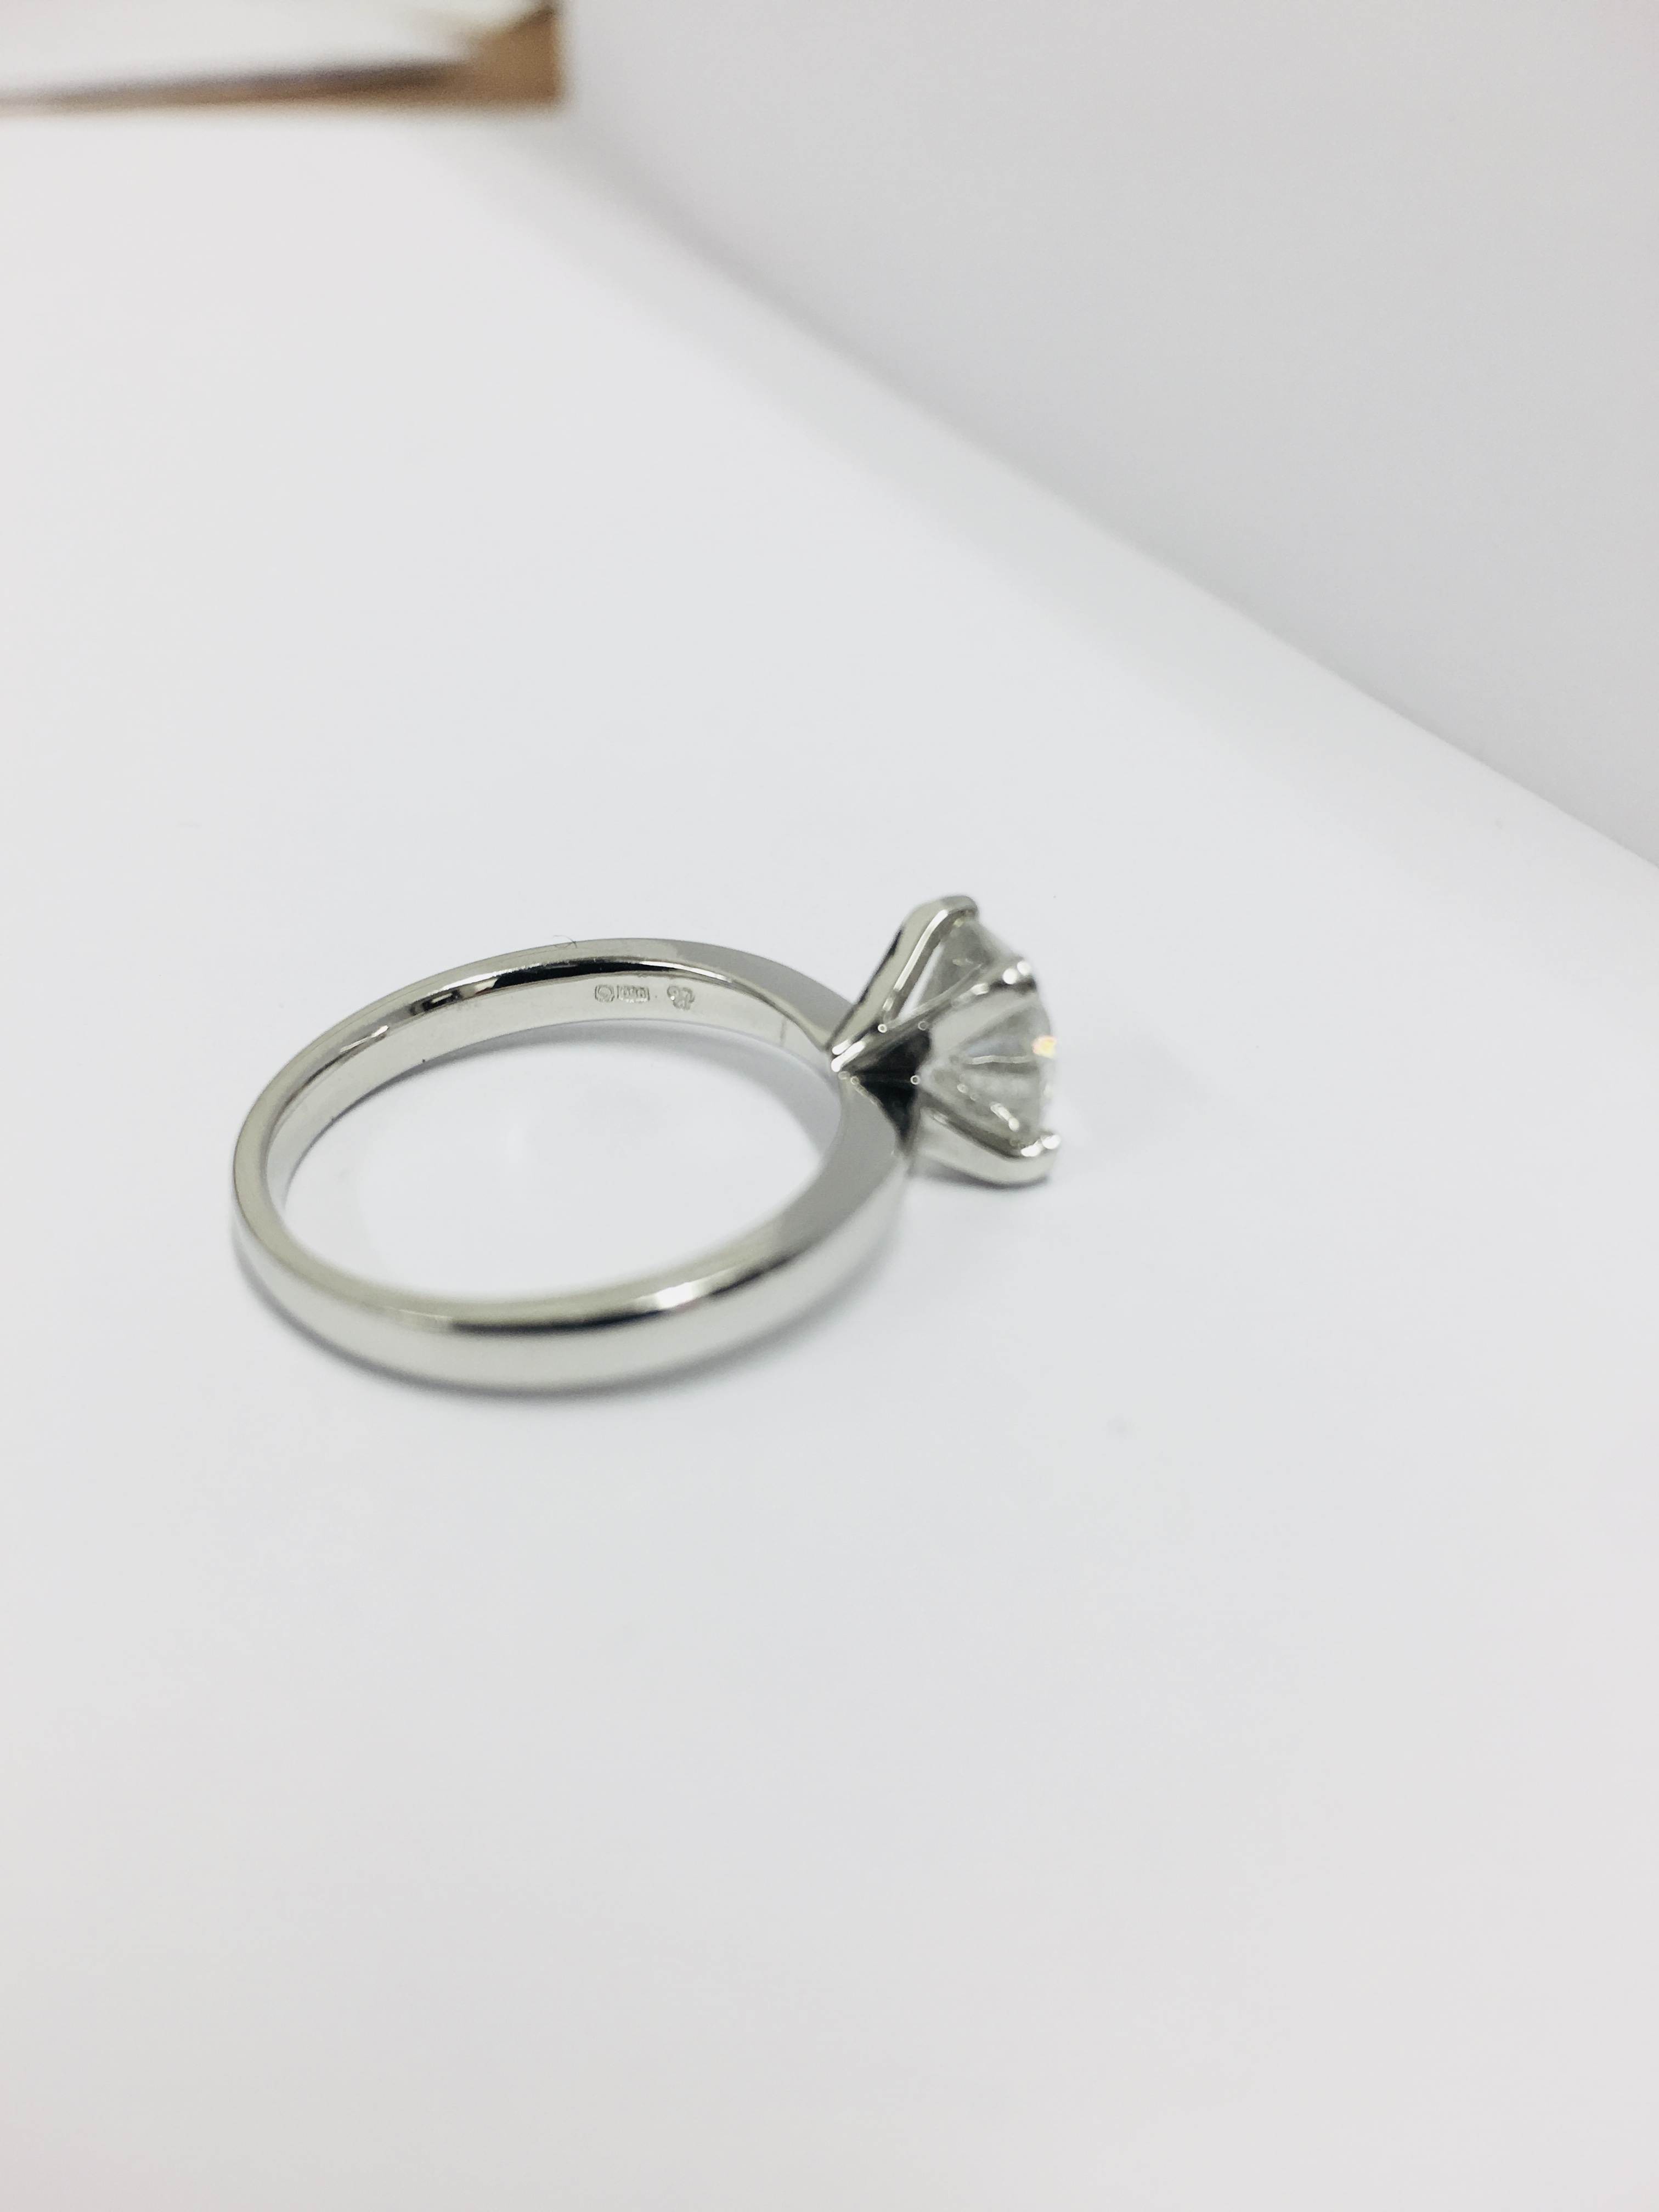 1.50Ct Diamond Solitaire Ring With An Enhanced Brilliant Cut Diamond. - Image 4 of 4